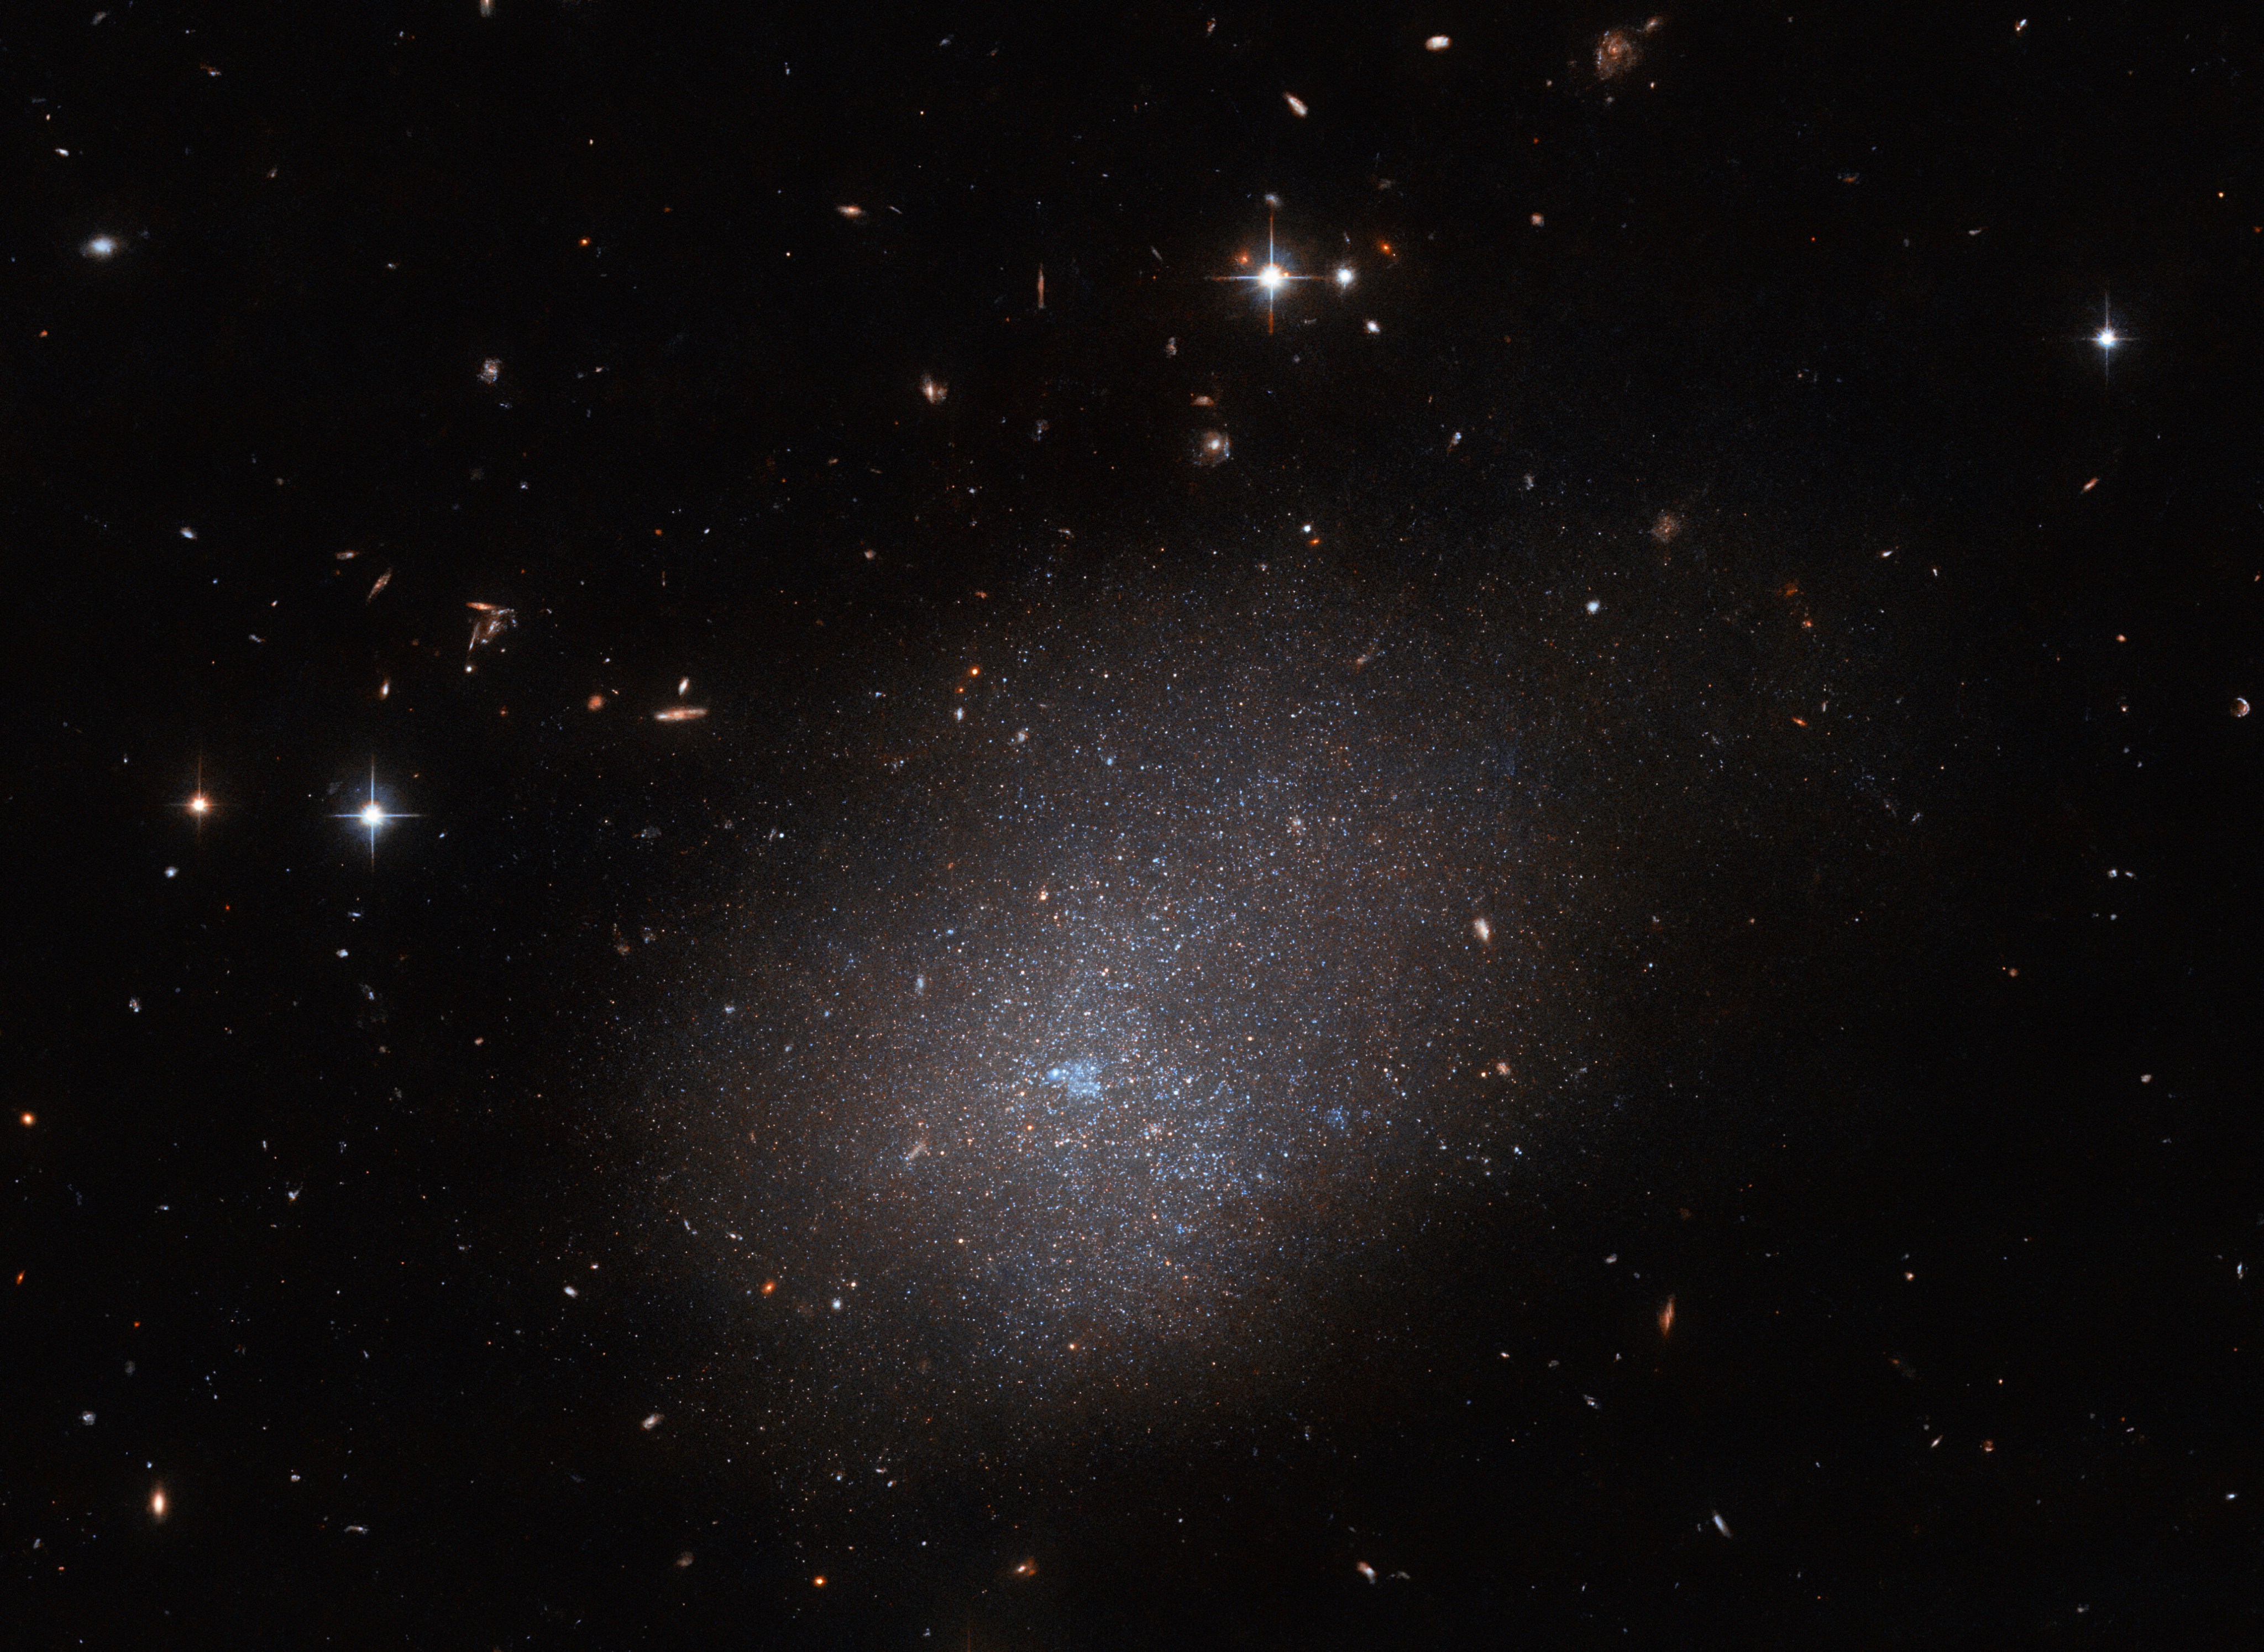 An irregular galaxy that resembles the shape of a cloud. It is made of many tiny stars all clumped together, surrounded in a diffuse light. In the central, brightest part there is a bubble of blue gas. The galaxy is surrounded by mostly very small and faint objects, though there are bright stars above and to the left of it, and a string of galaxies nearby.